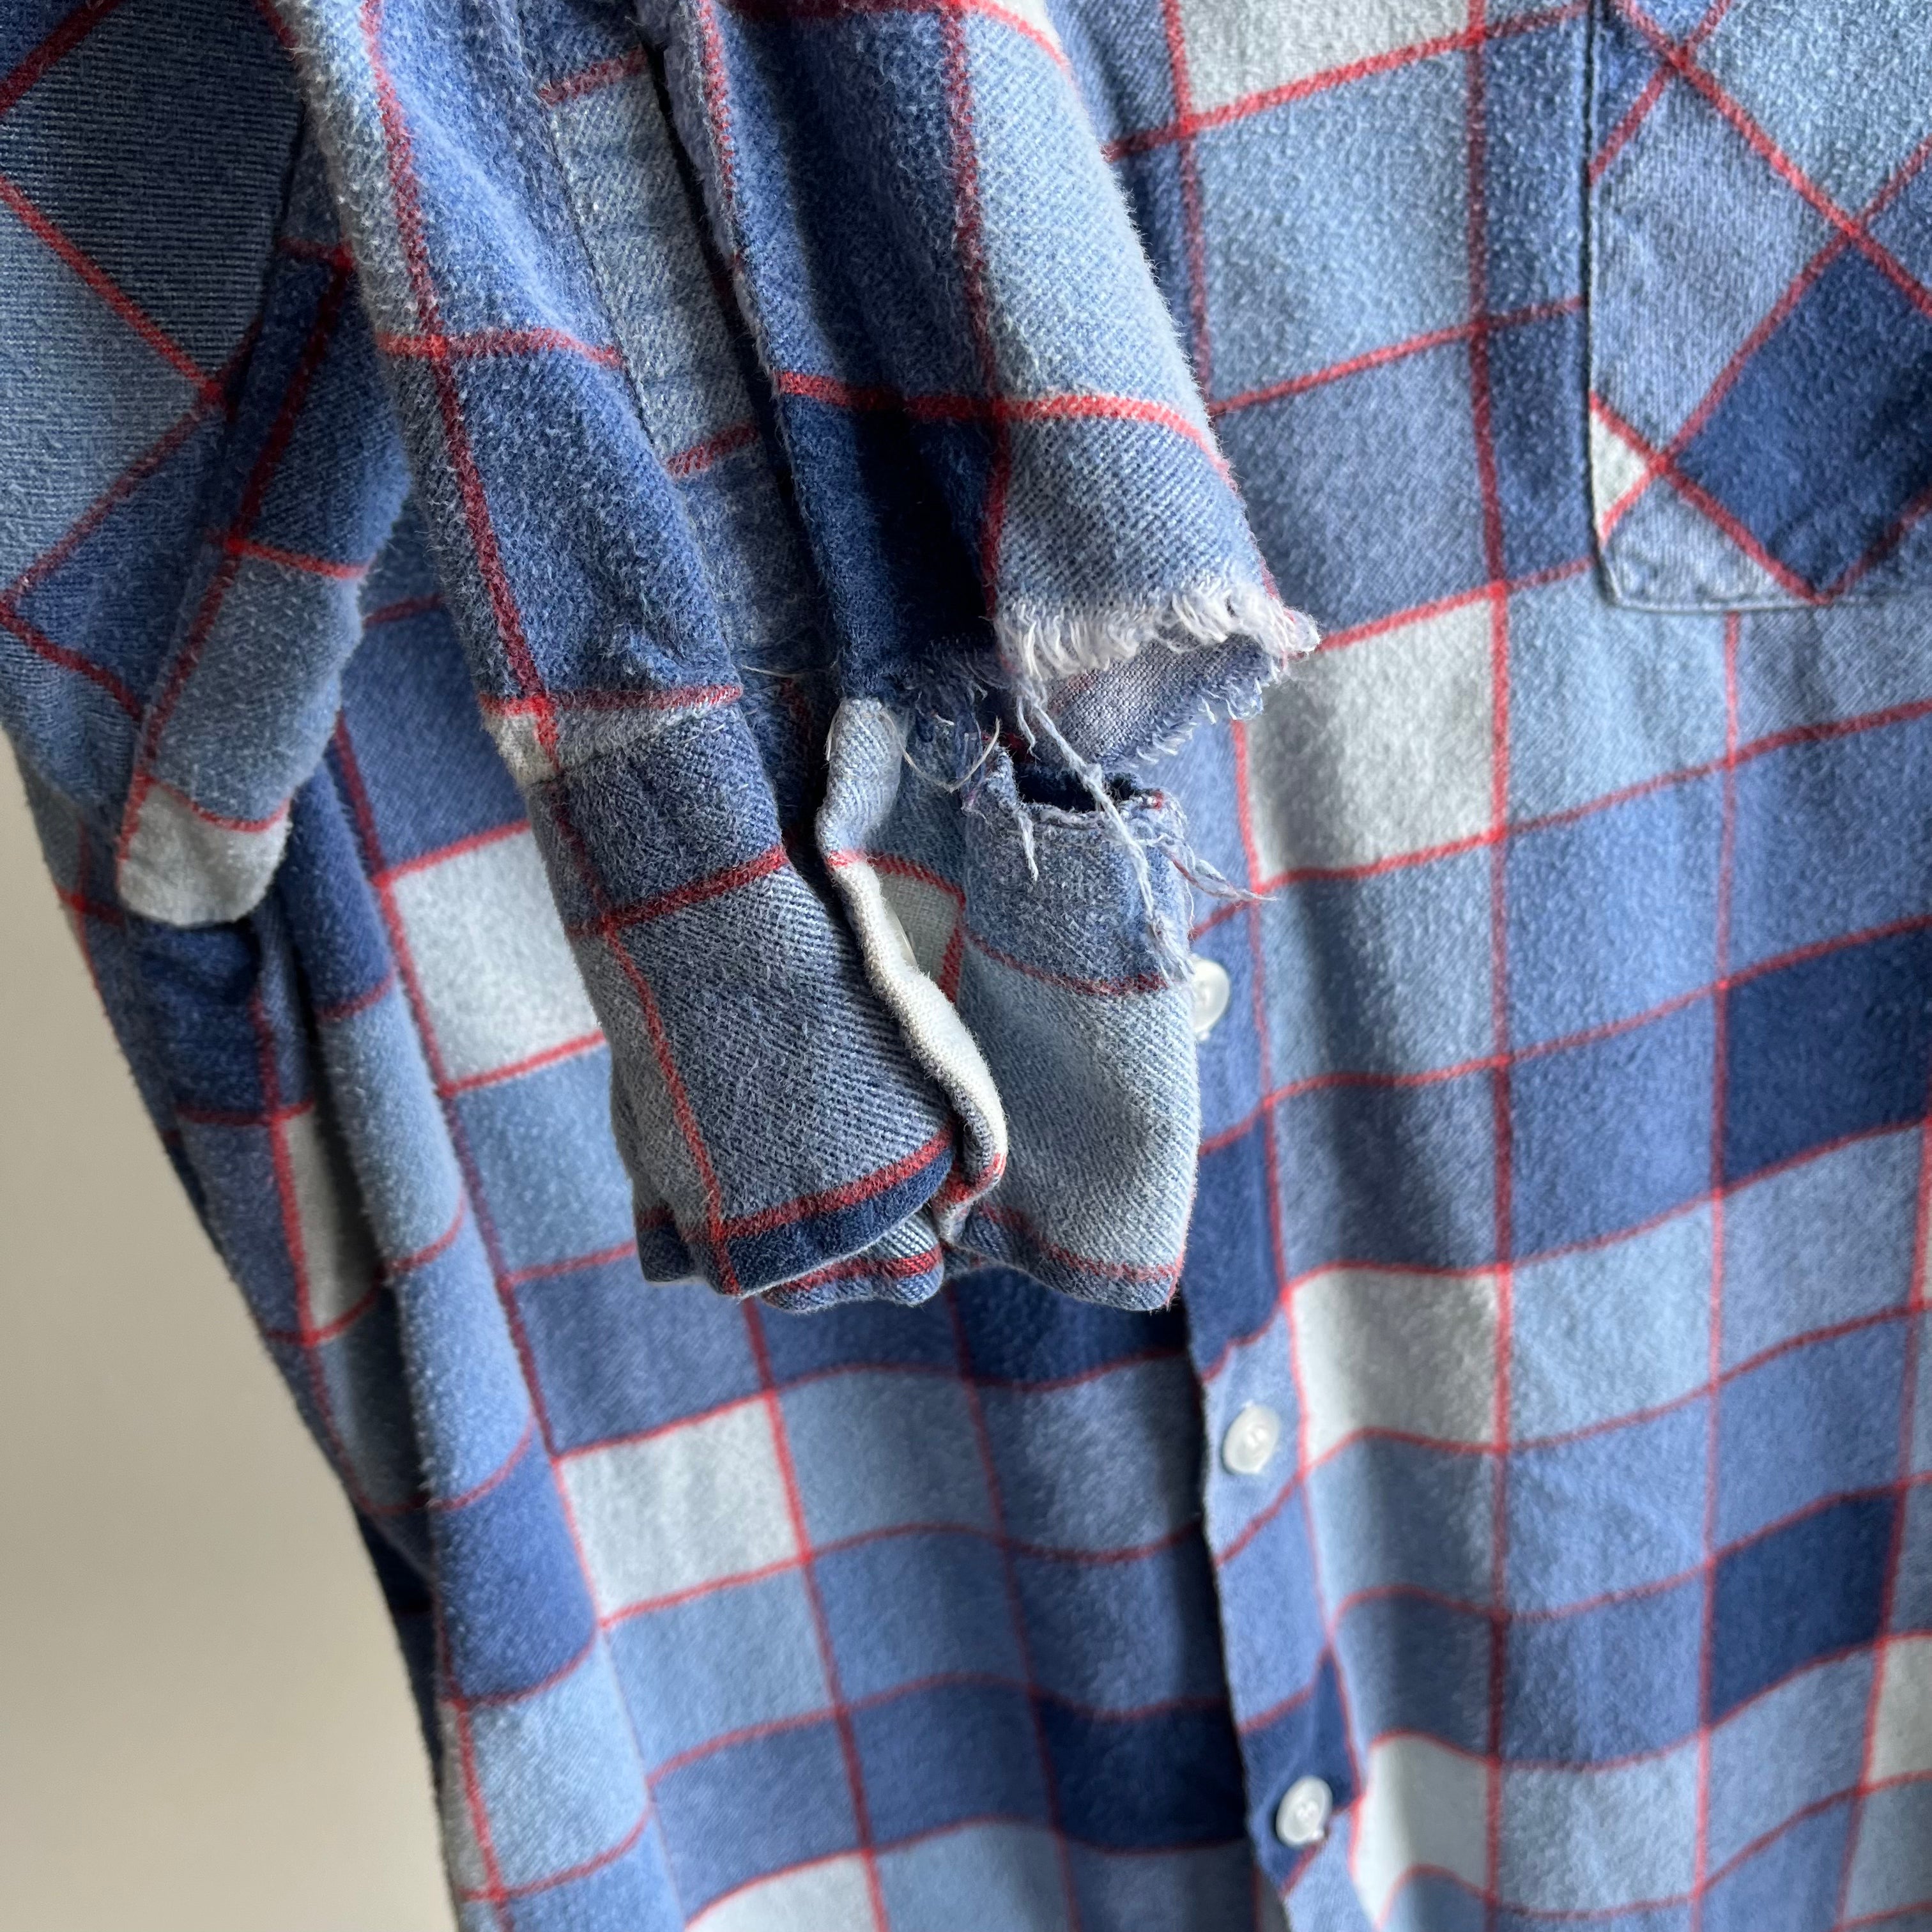 1970s Kings Road by Sears Lightweight Flannel with Cuff Tear